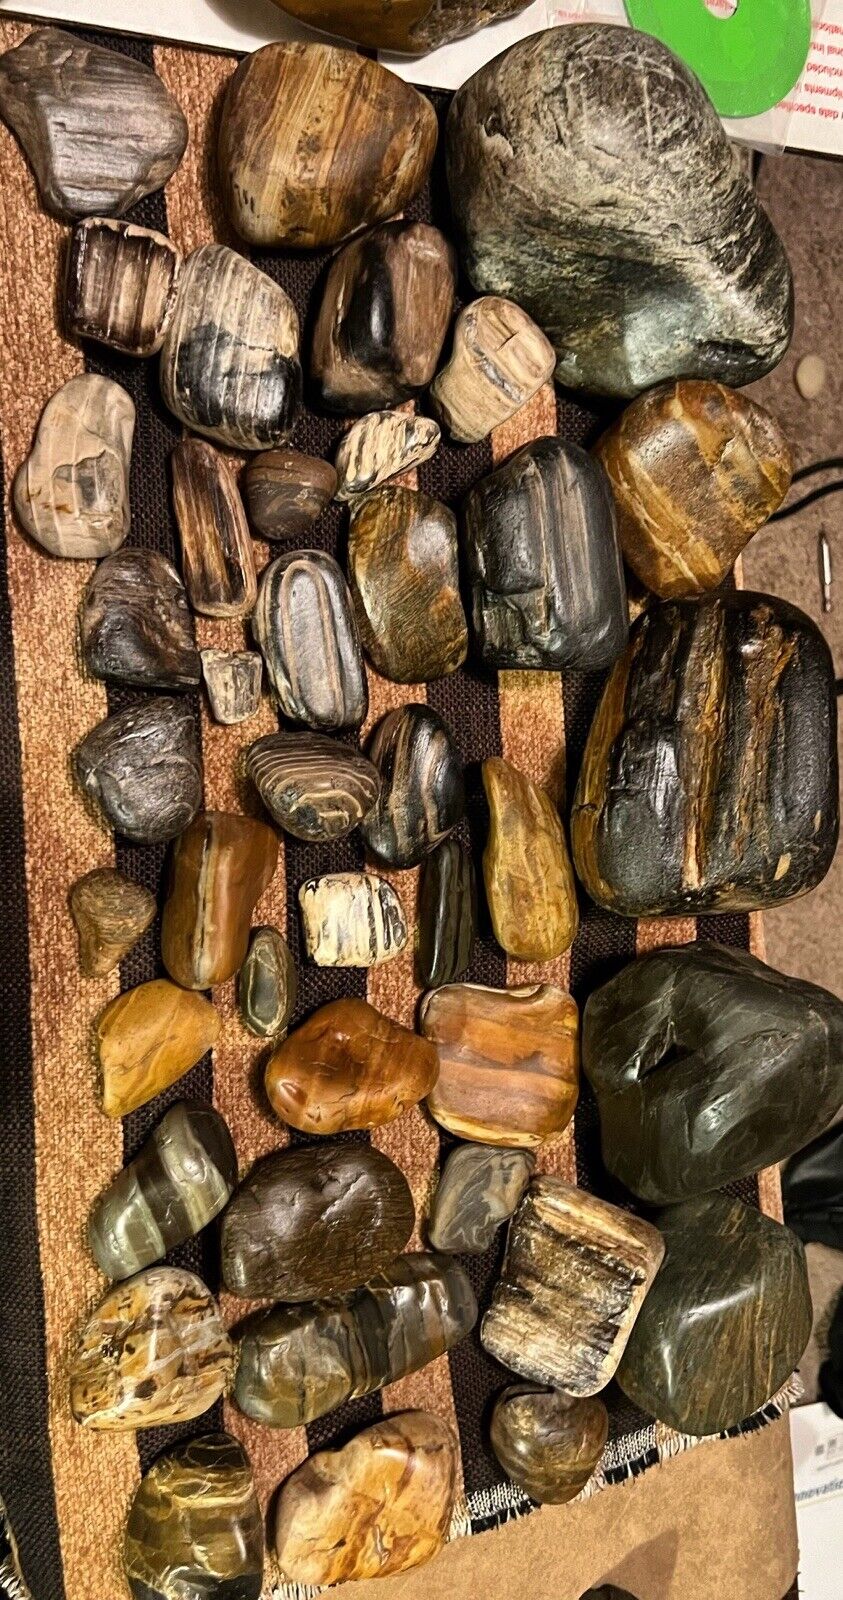 Yellowstone River Naturally Tumbled Petrified Woods Collection. 10+ Lbs